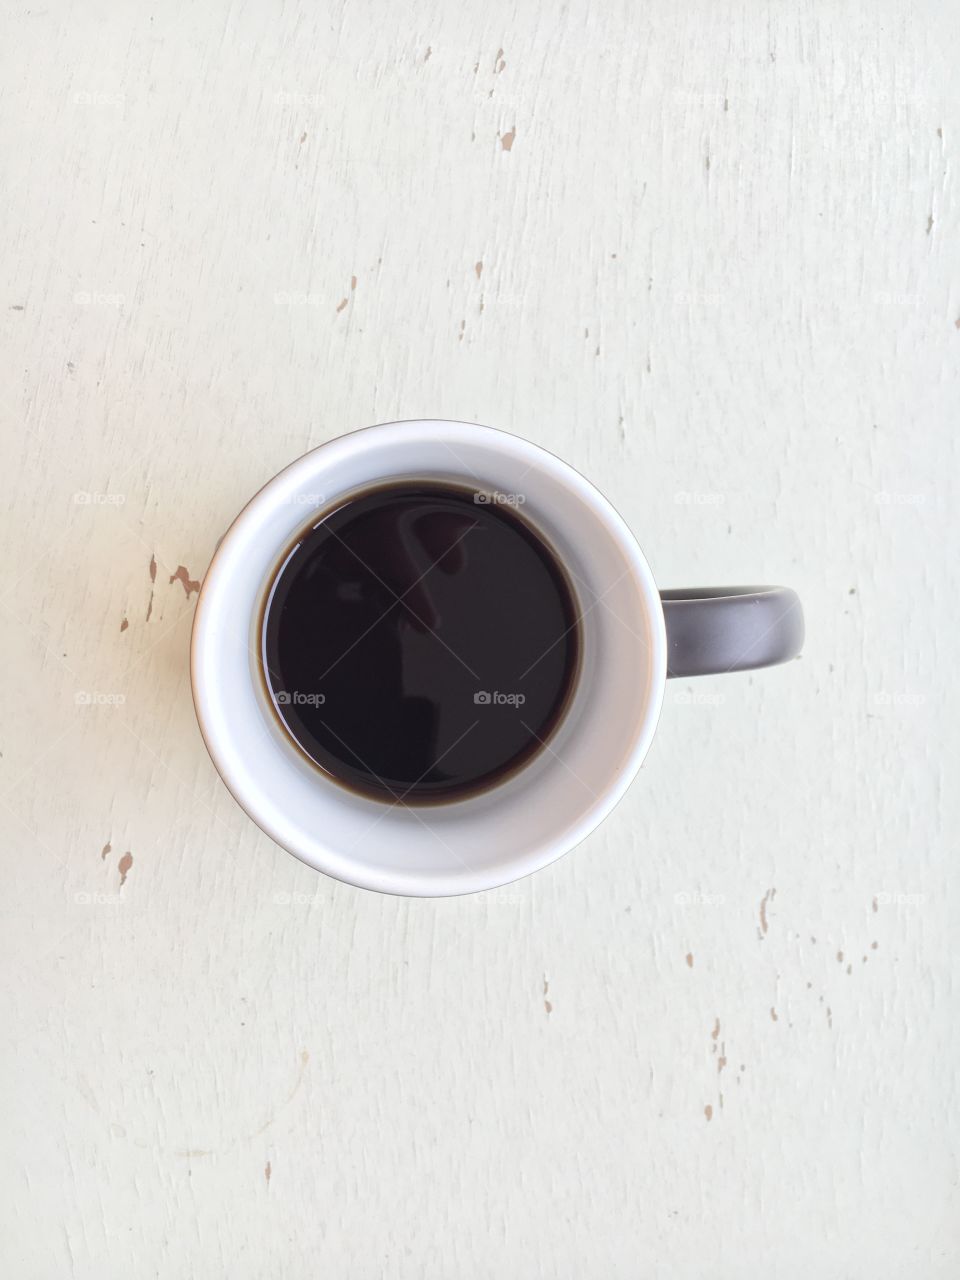 Half Empty Cup of Coffee on an Old Antique Desk in February 2018